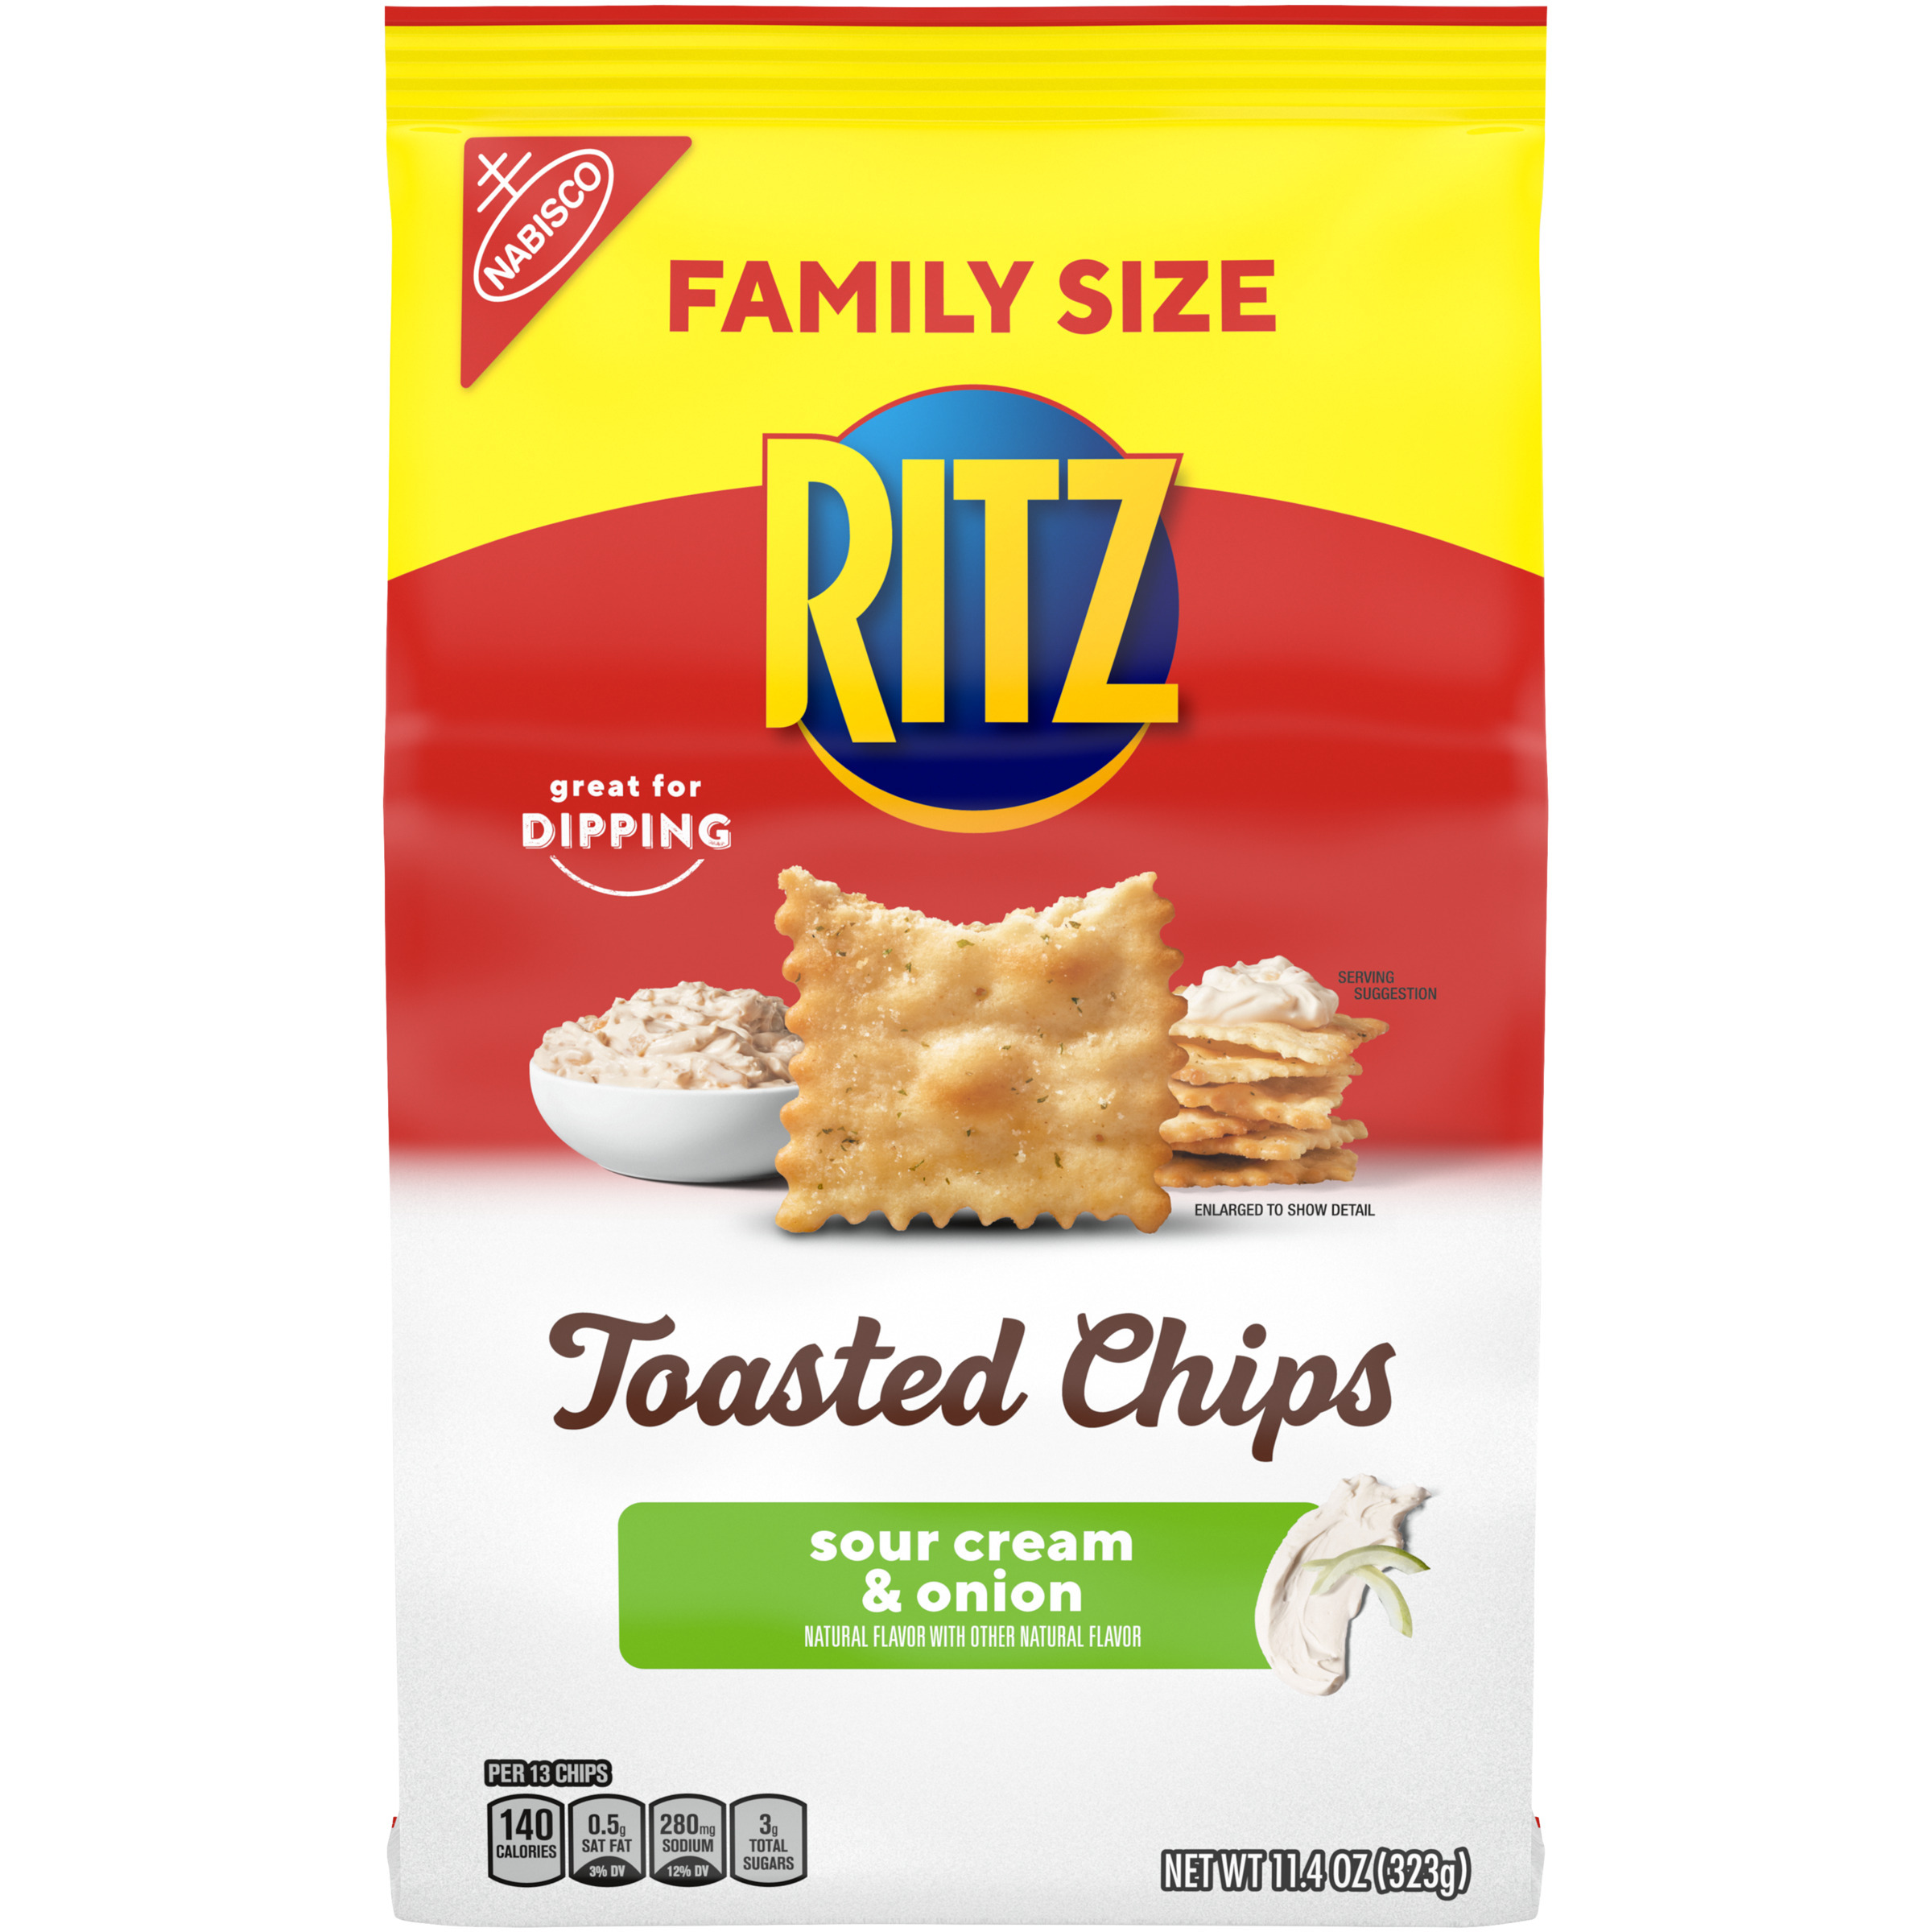 RITZ Toasted Chips Sour Cream and Onion Crackers, Family Size, 11.4 oz-0